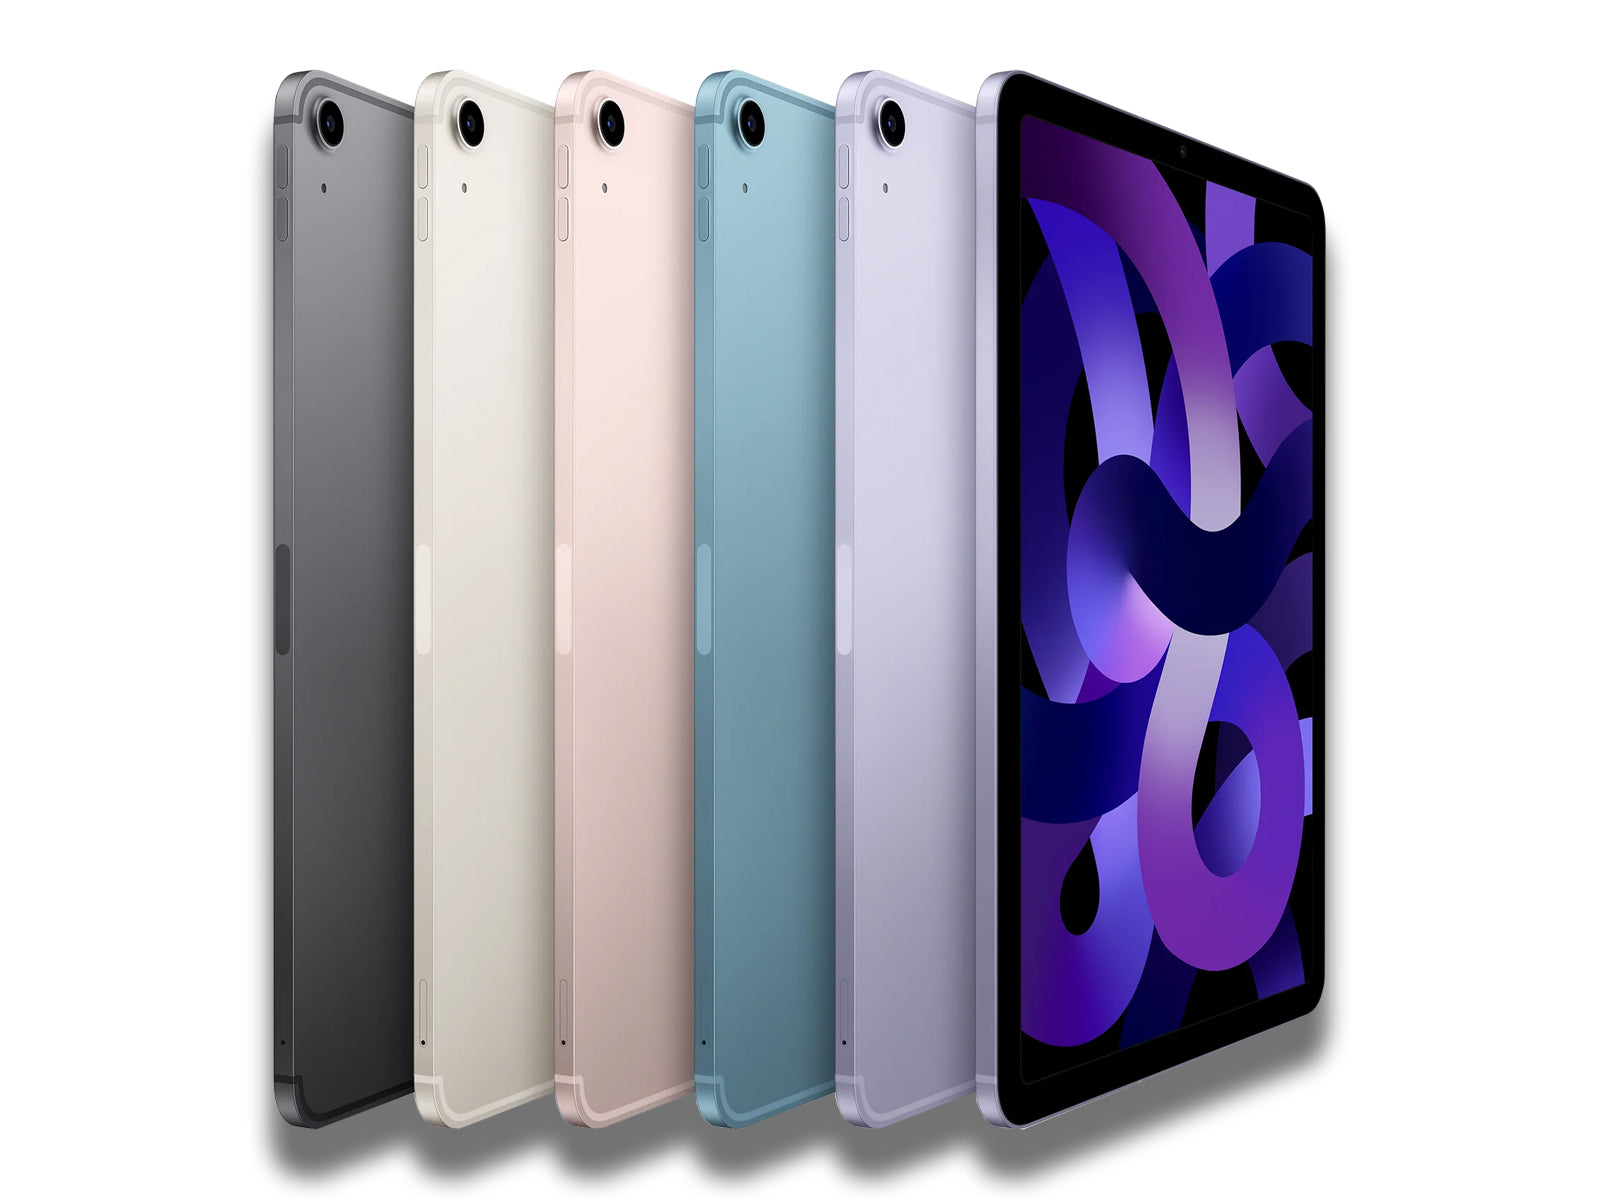 iPad Air 5 Space Grey, Starlight, Pink, Blue, And Purple From The Side